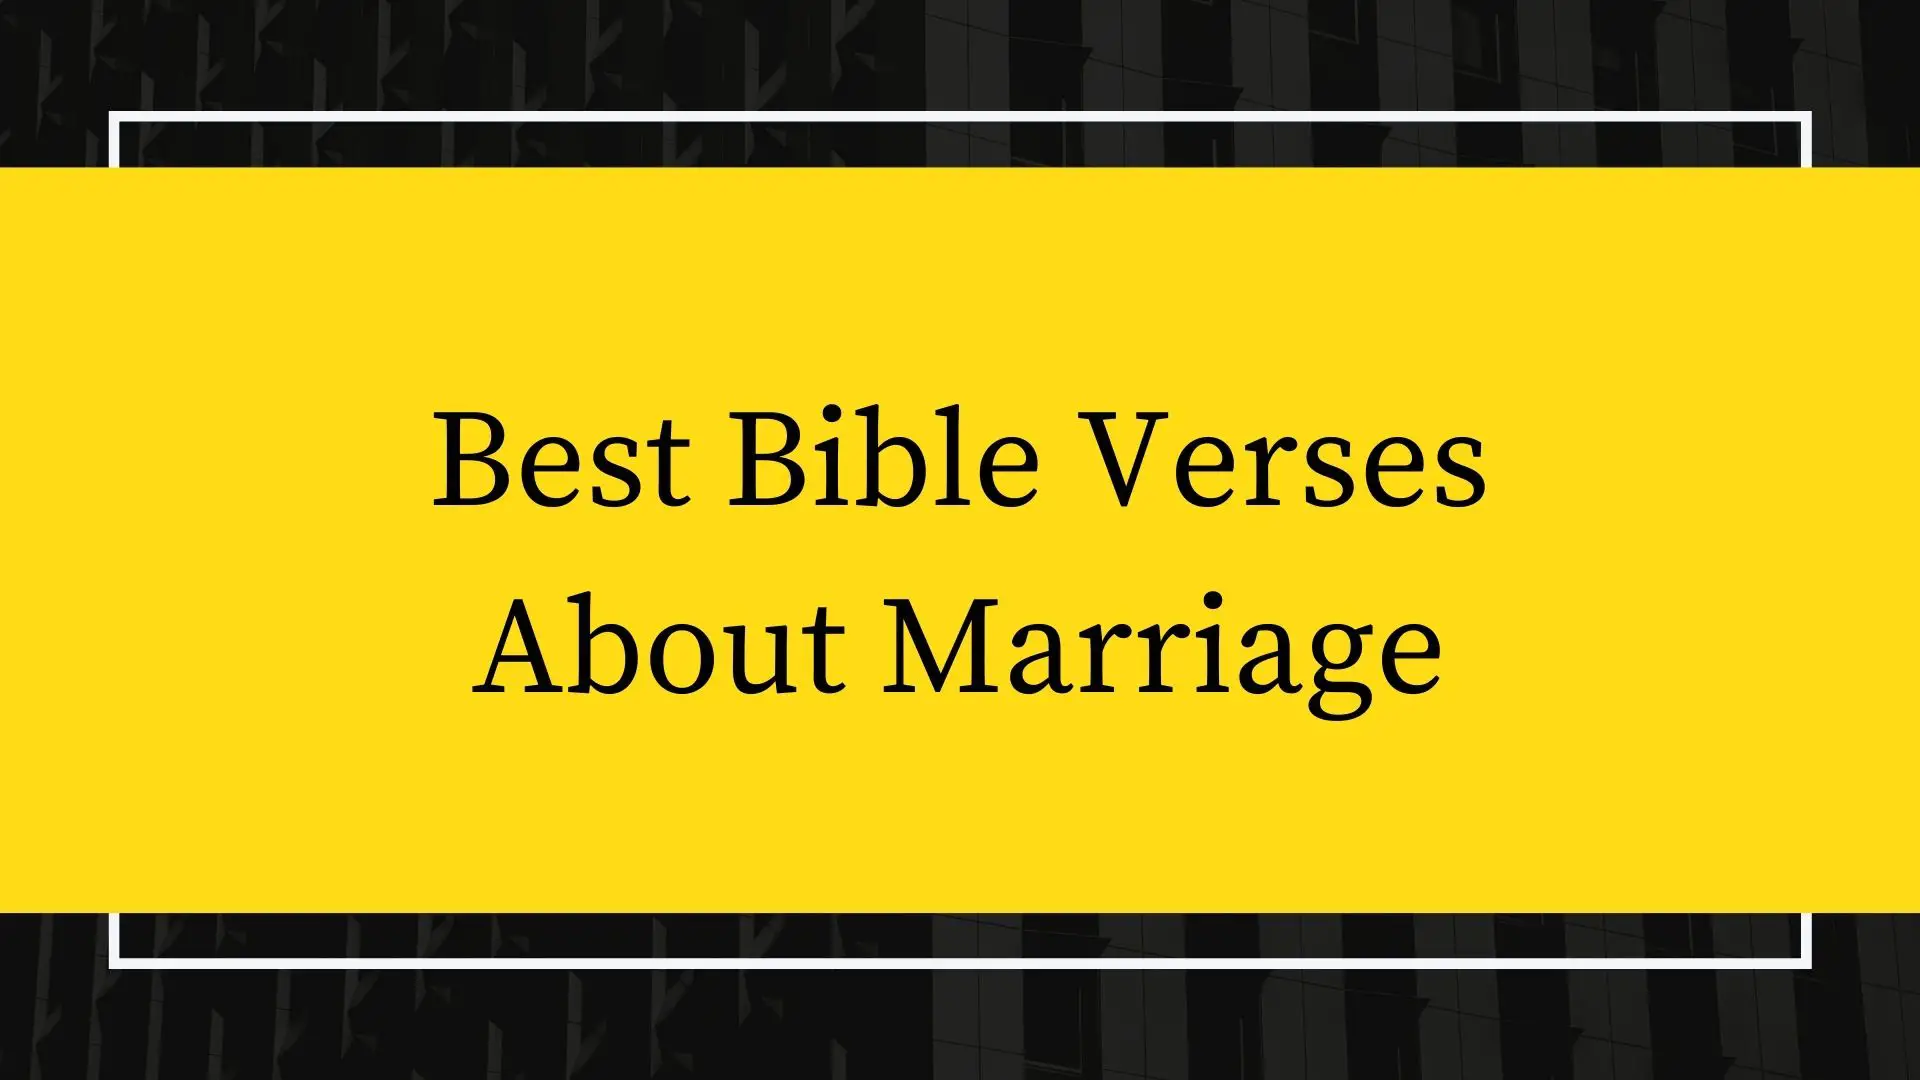 Best Bible Verses About Marriage